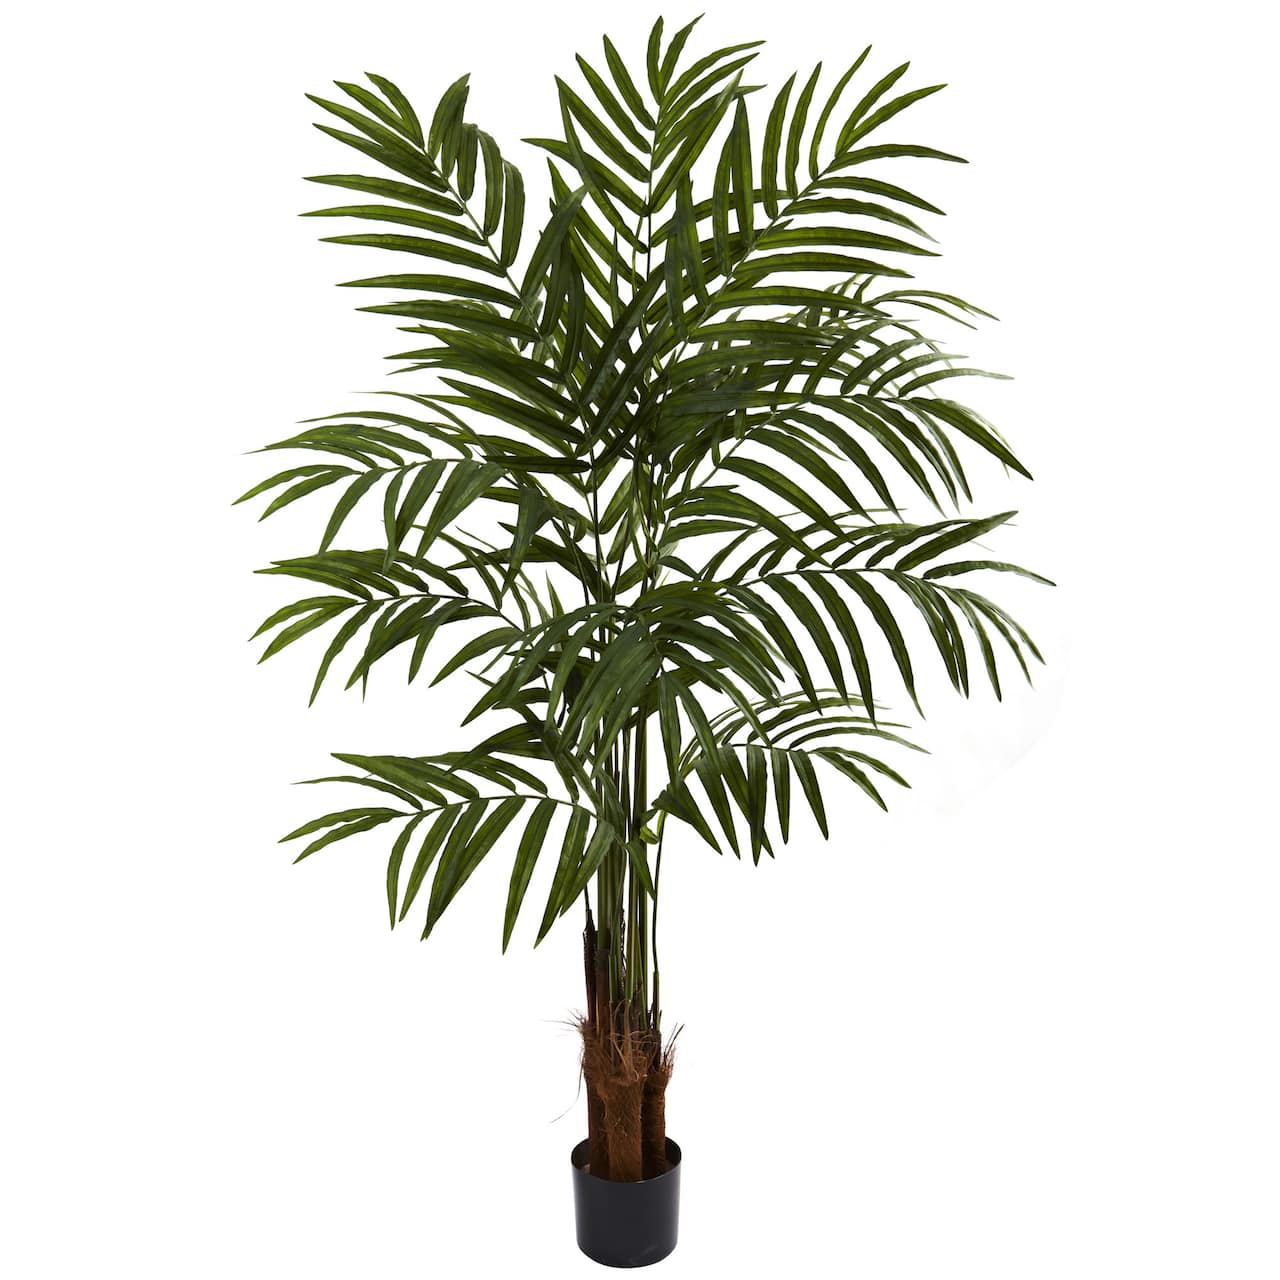 5ft. Potted Green Big Palm Tree